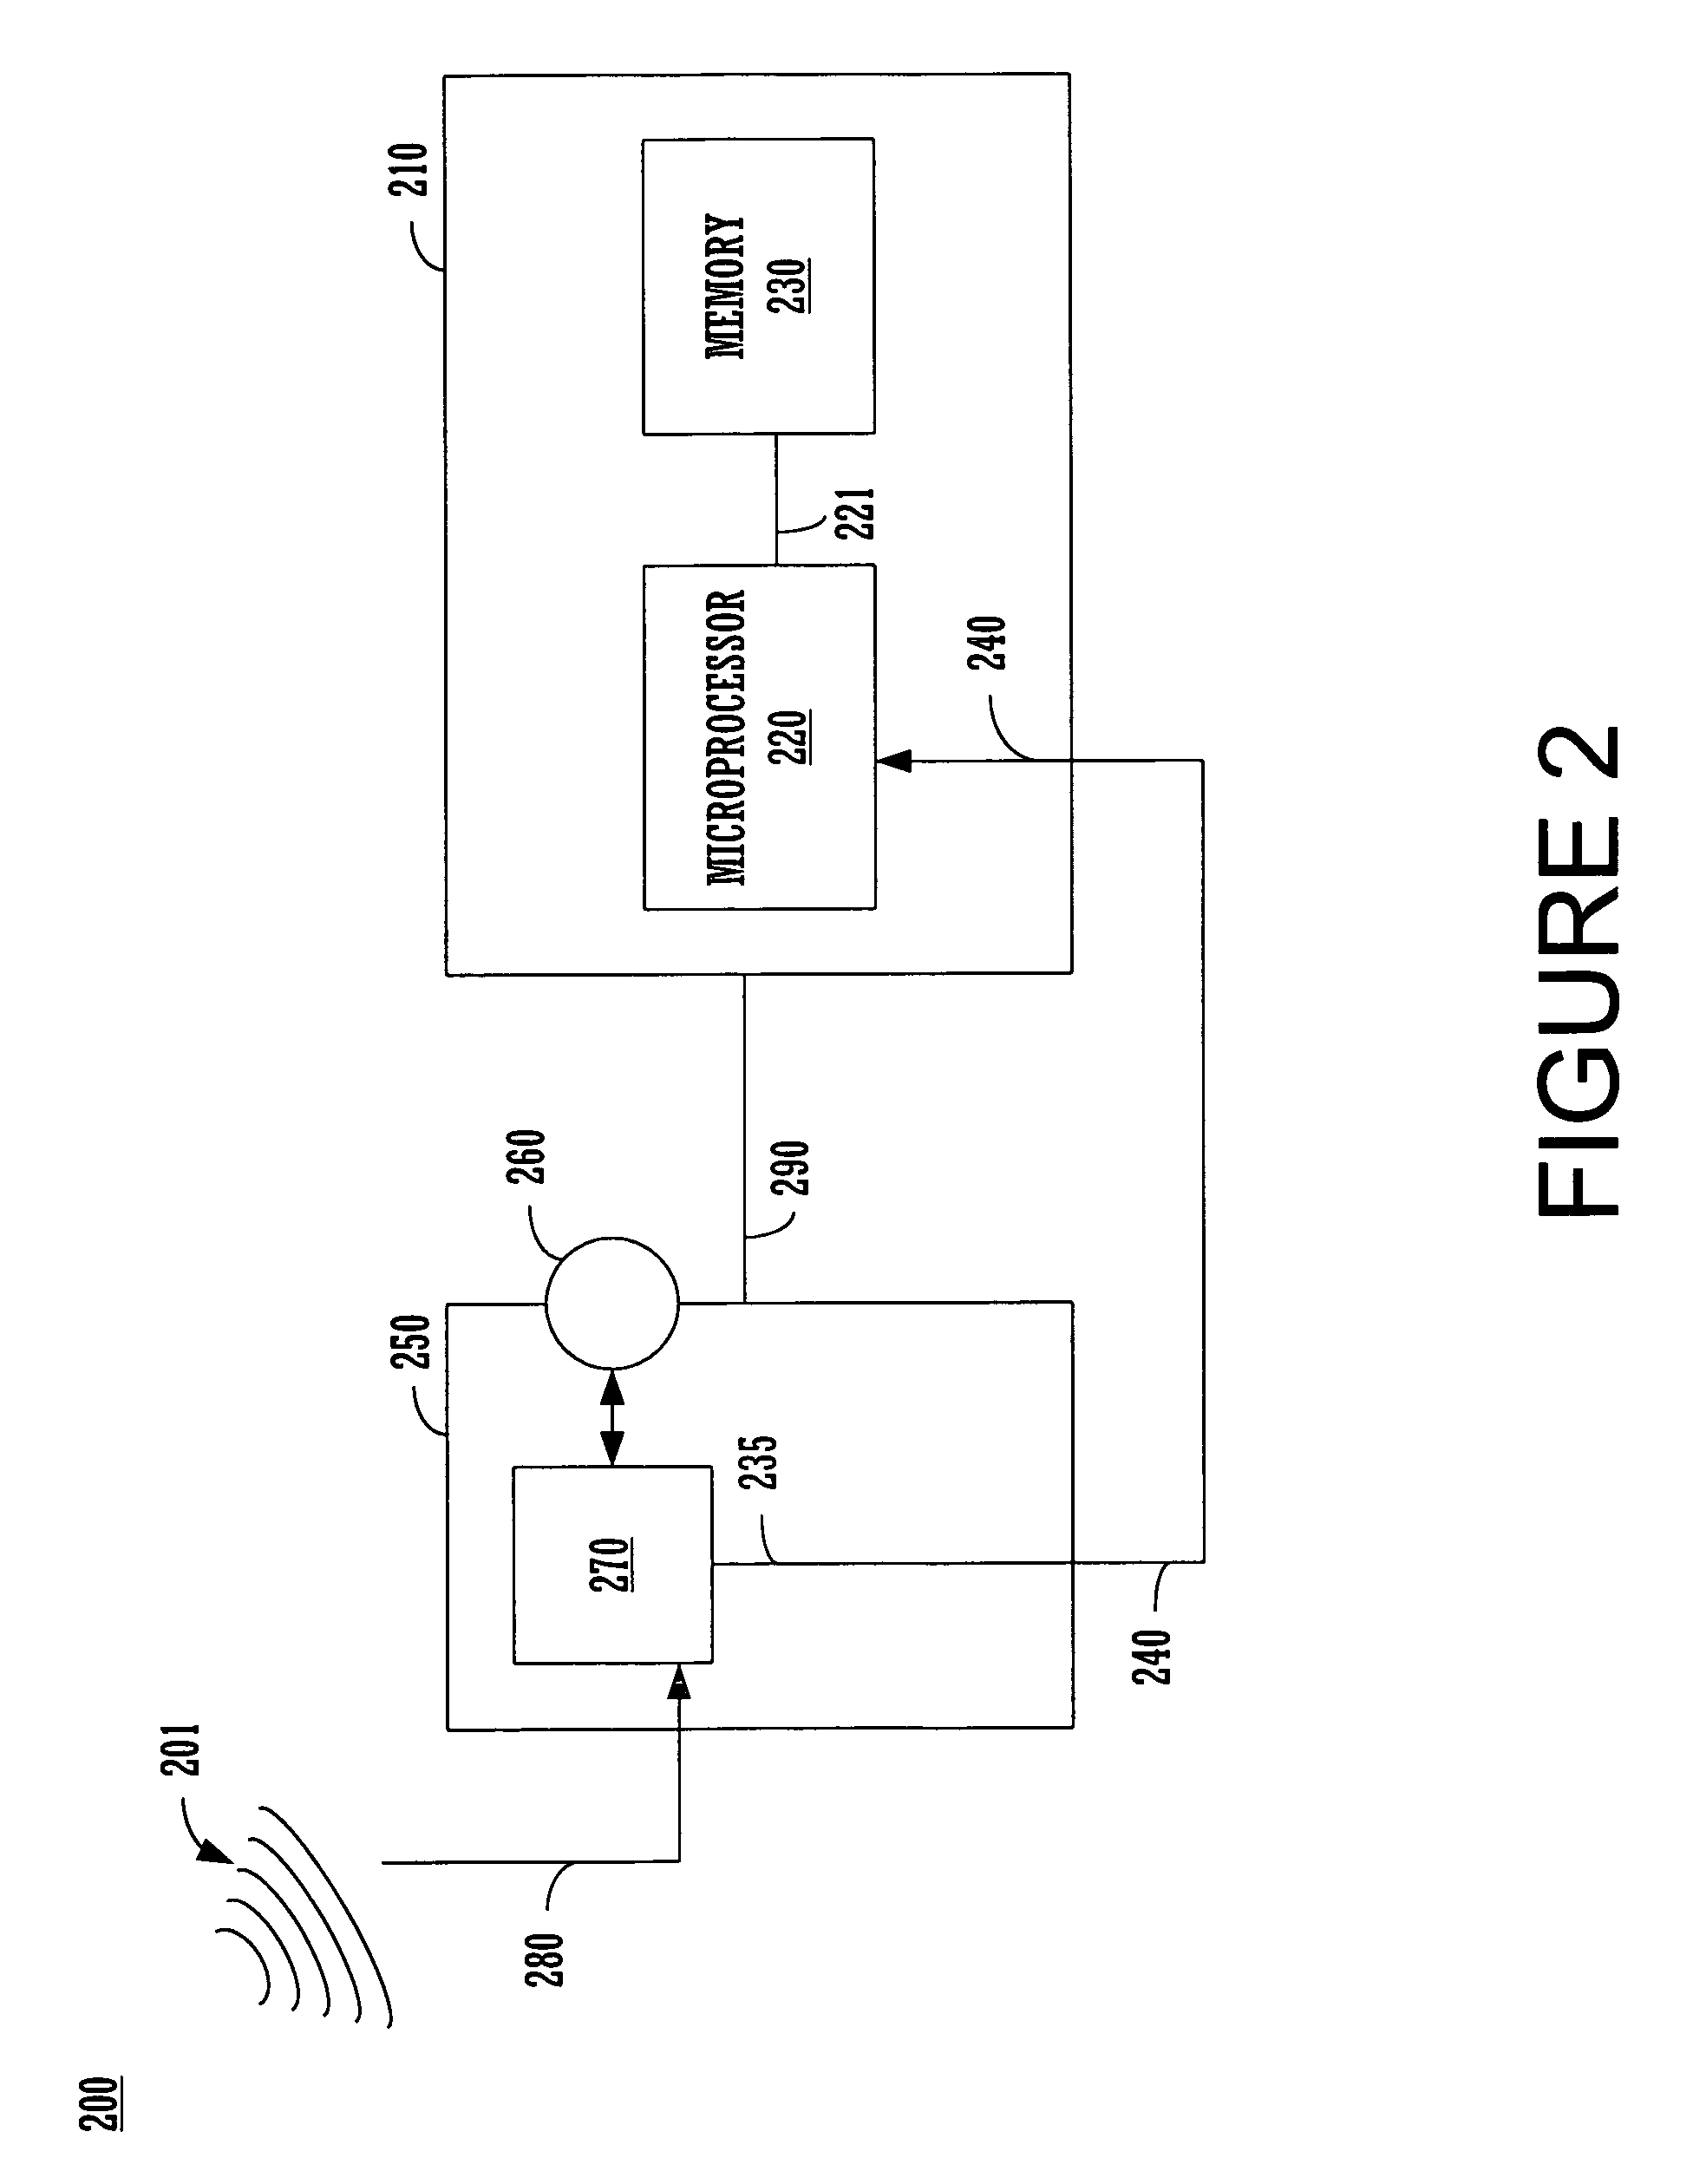 Method for waking a device in response to a wireless network activity